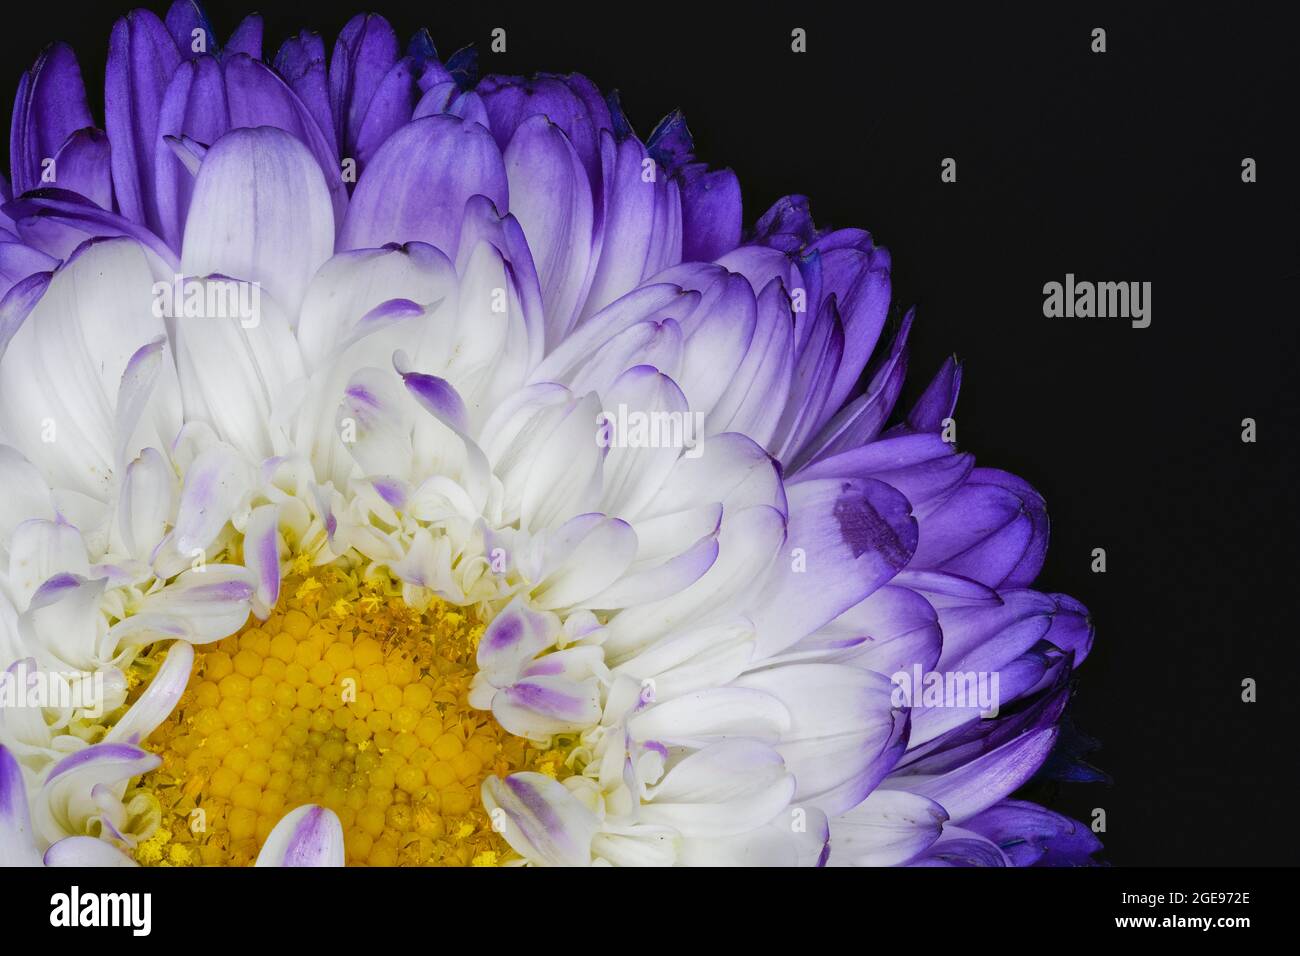 A beautiful single purple and white Aster flower photographed against a plain black background Stock Photo